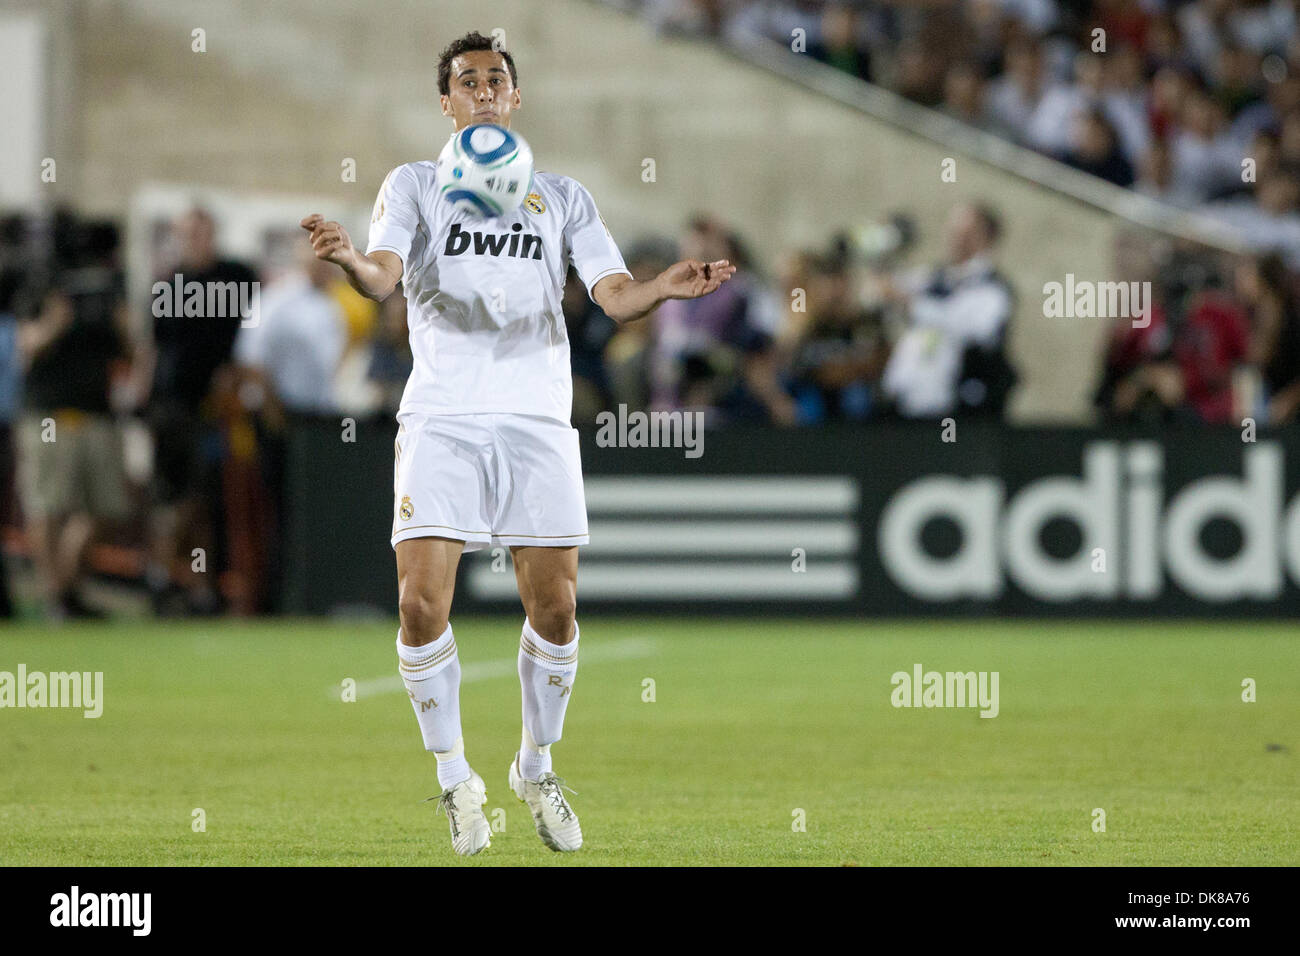 July 16, 2011 - Los Angeles, California, U.S - Real Madrid C.F. defender Alvaro Arbeloa #17 controls the ball during the World Football Challenge game between La Liga powerhouse Real Madrid and the Los Angeles Galaxy at the Los Angeles Memorial Coliseum. Real Madrid went on to defeat the Galaxy with a final score of 4-1. (Credit Image: © Brandon Parry/Southcreek Global/ZUMAPRESS.co Stock Photo